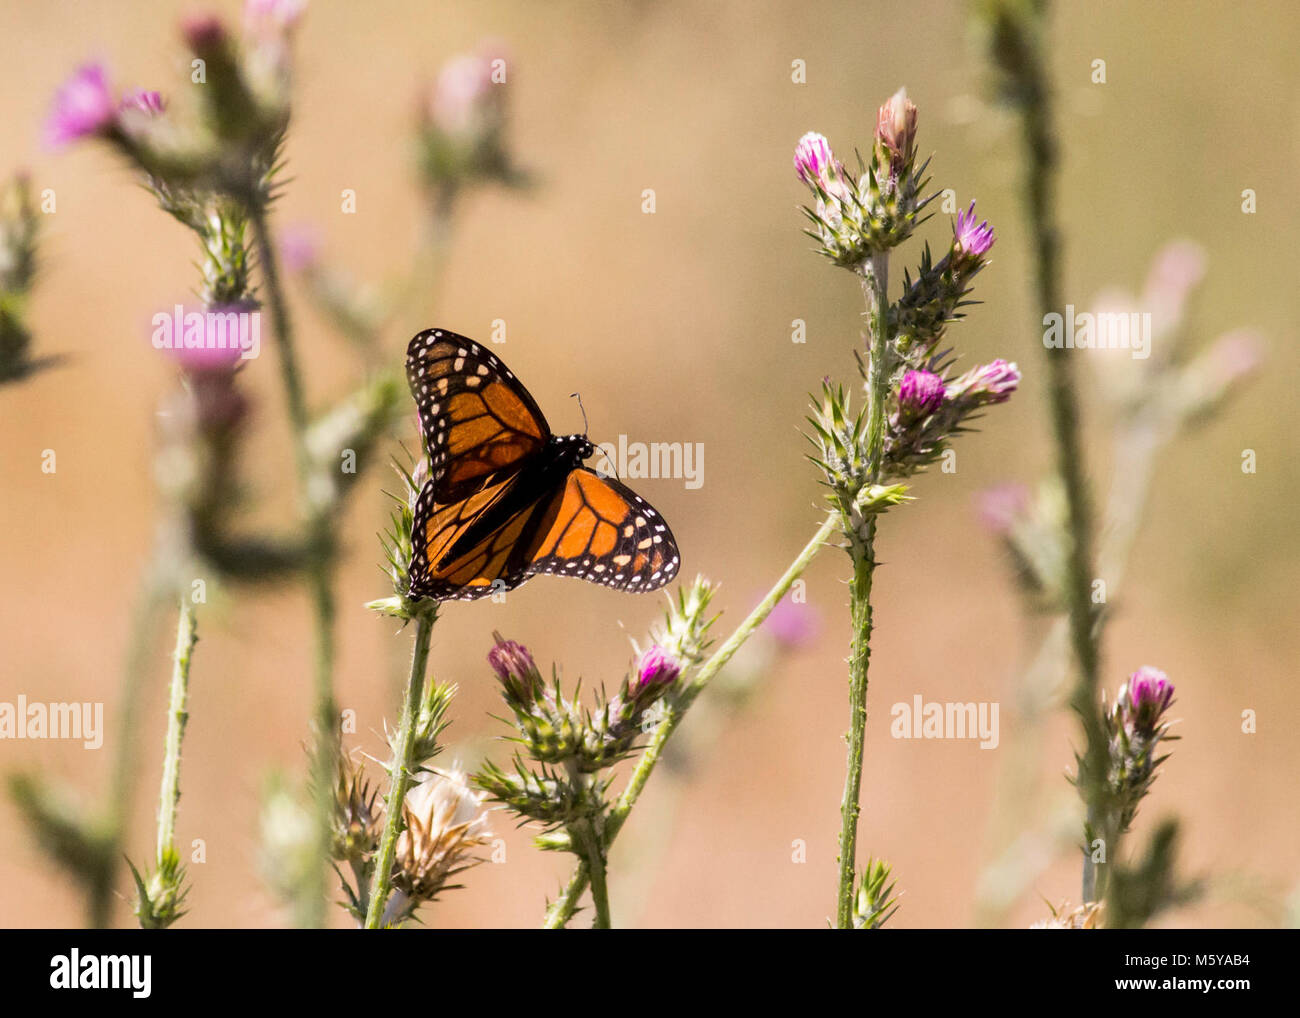 Monarch Butterfly. Monarch butterfly lands on an Italian thistle plant (Carduus pycnocephalus) at Nicholas Flat in the Santa Monica Mountains. Stock Photo